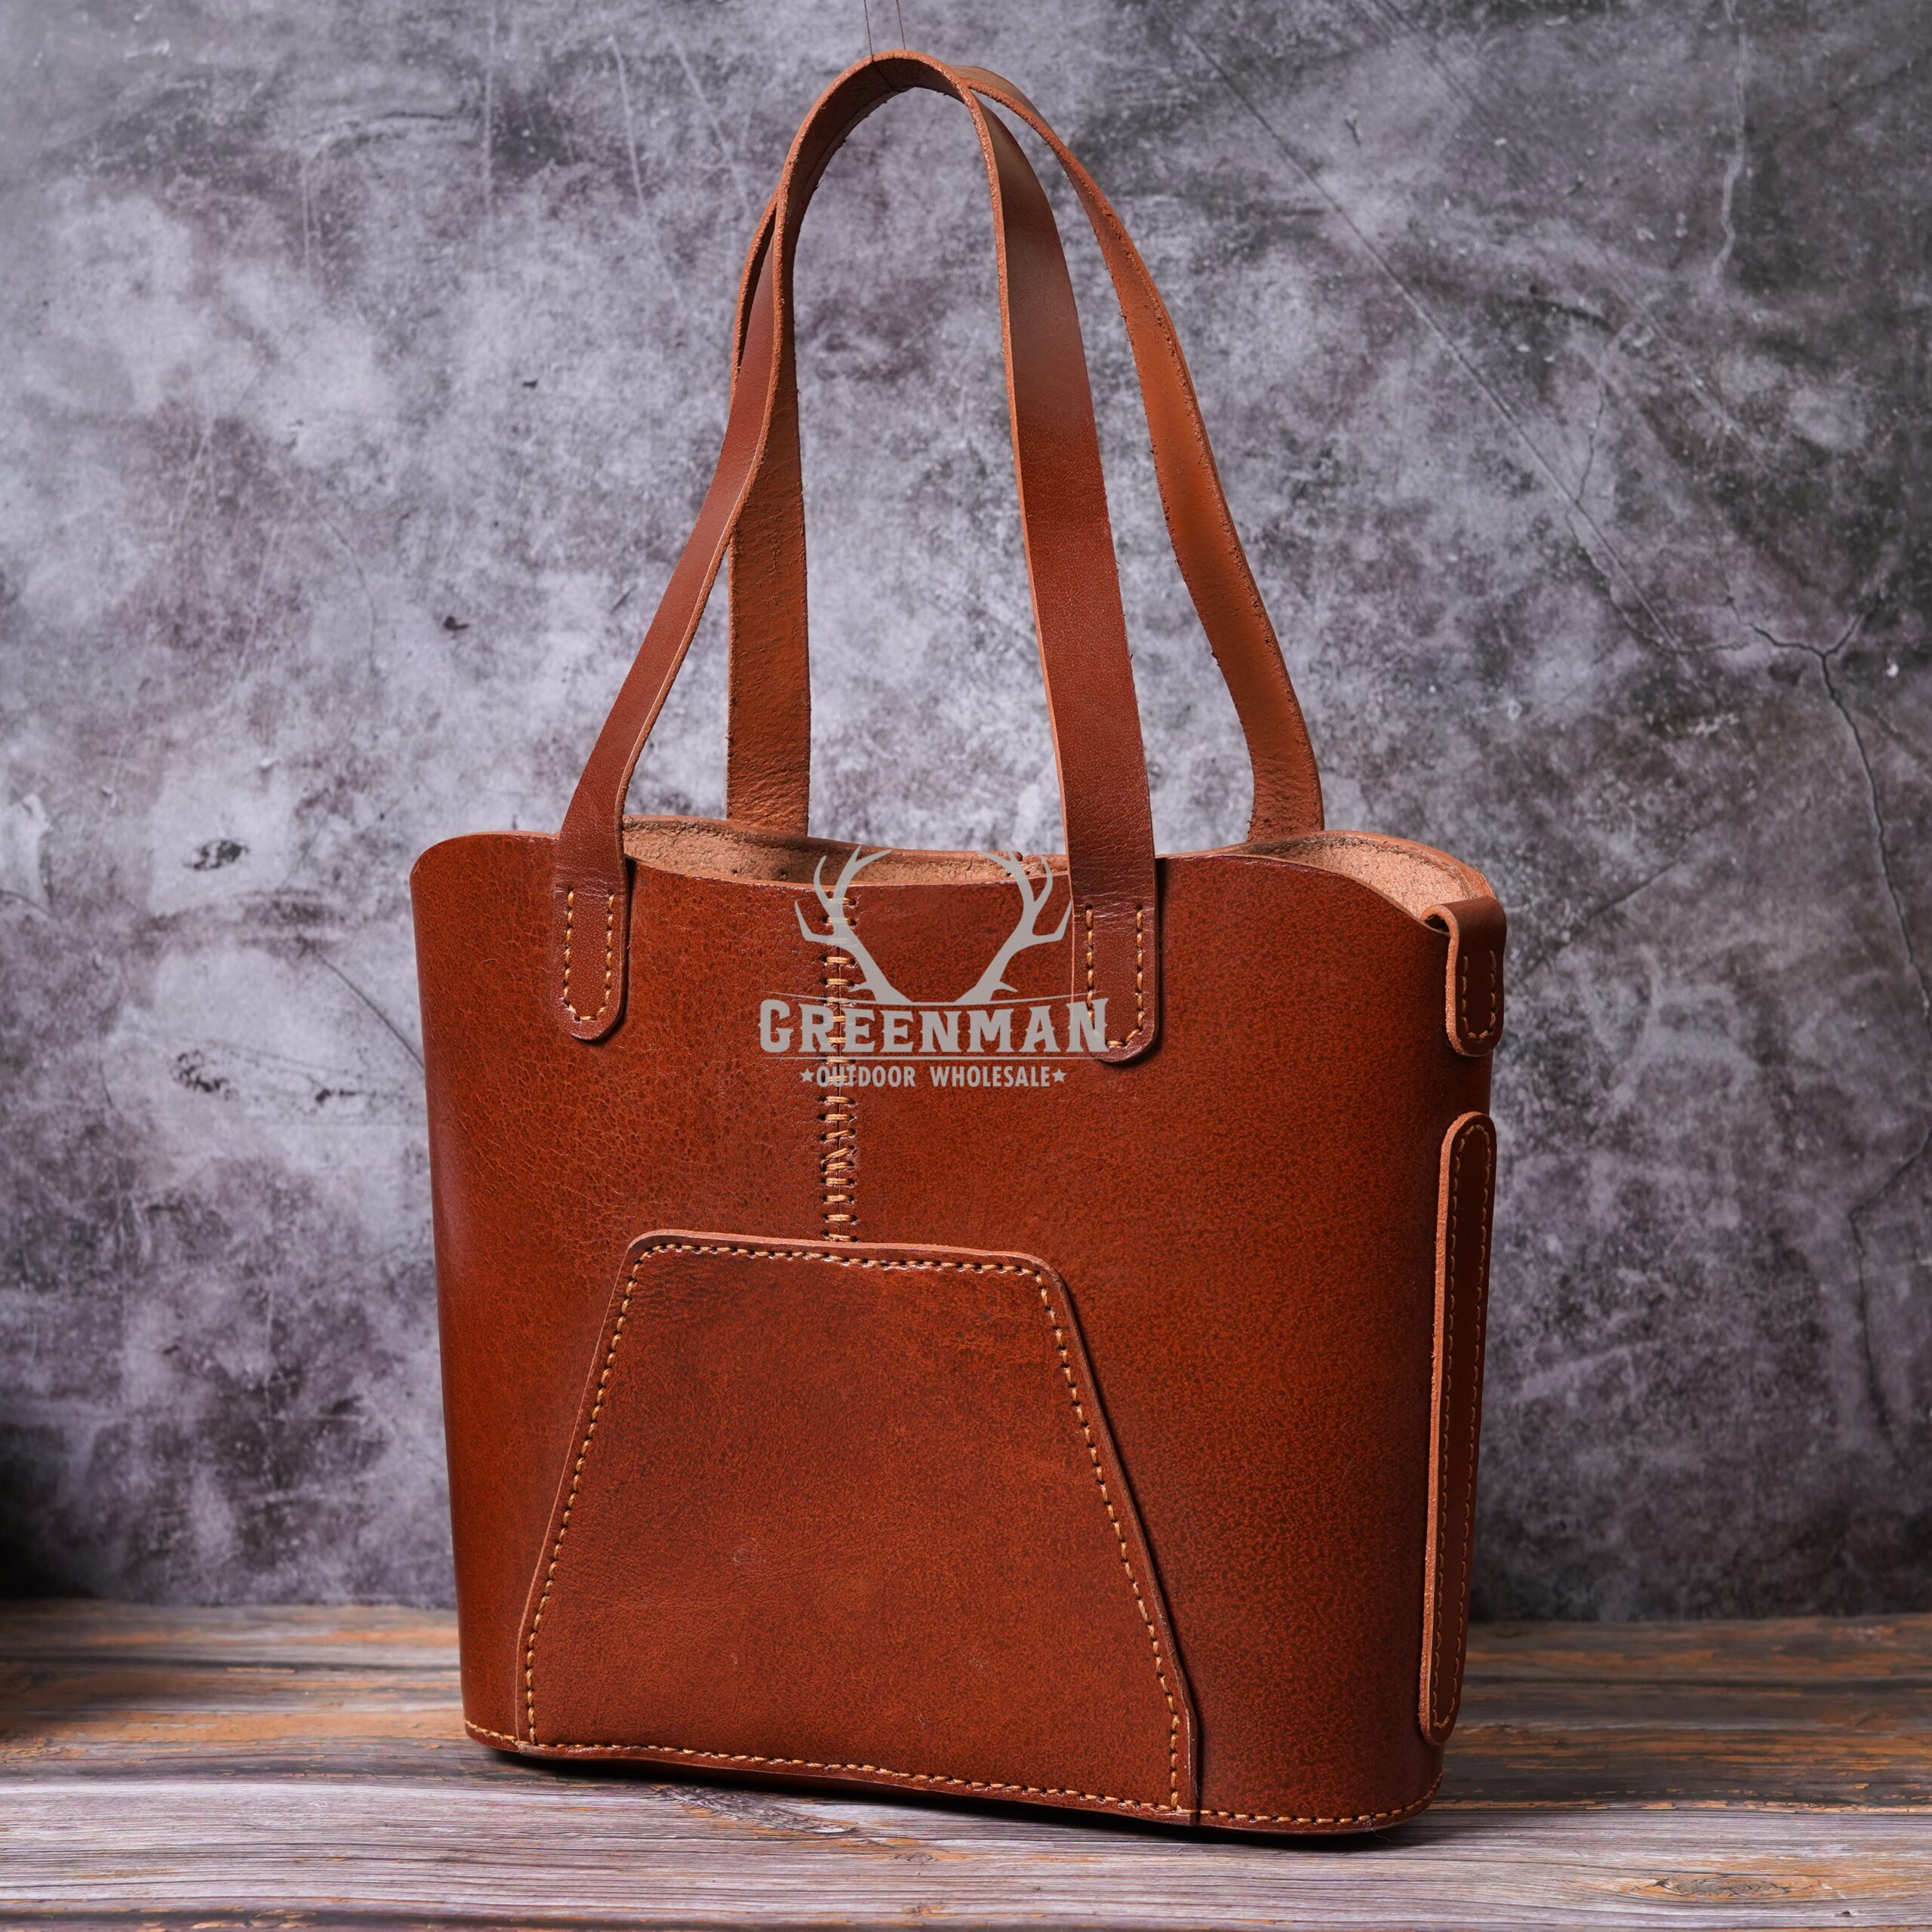 Luxury Leather Purse, Tote bags for Women, Leather Tote bag